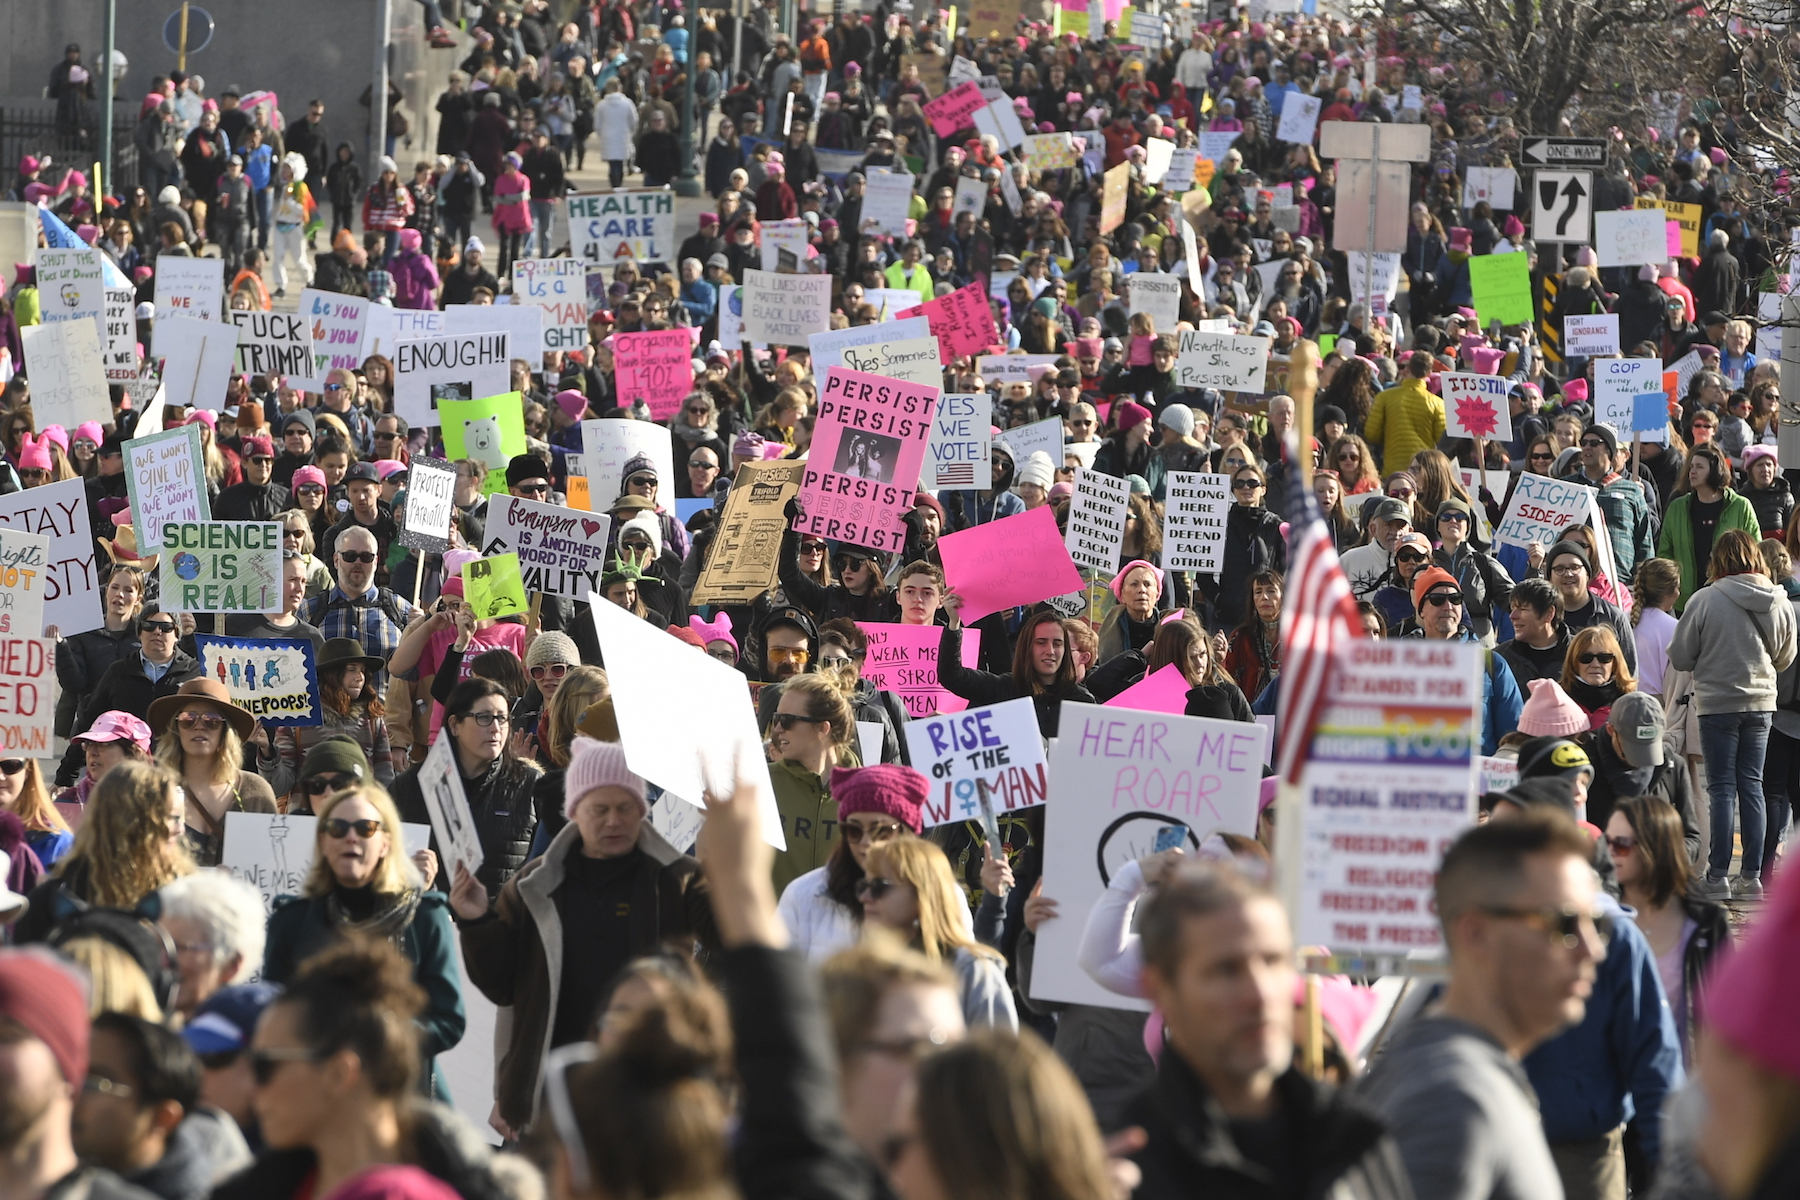 PHOTOS: Women's marches across the country | abc7.com